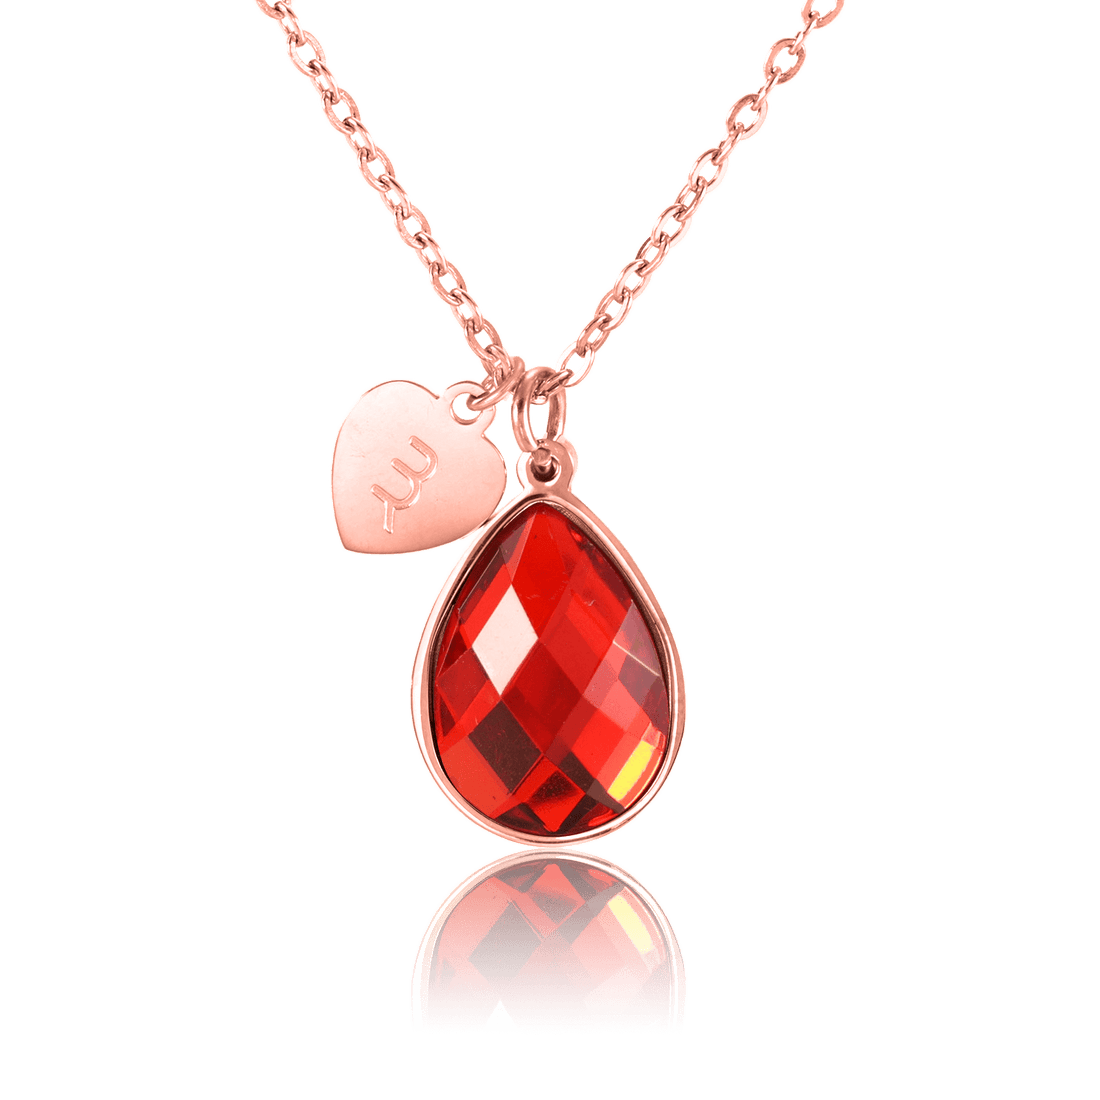 bianco rosso Necklaces Gold July Birthstone - Ruby cyprus greece jewelry gift free shipping europe worldwide